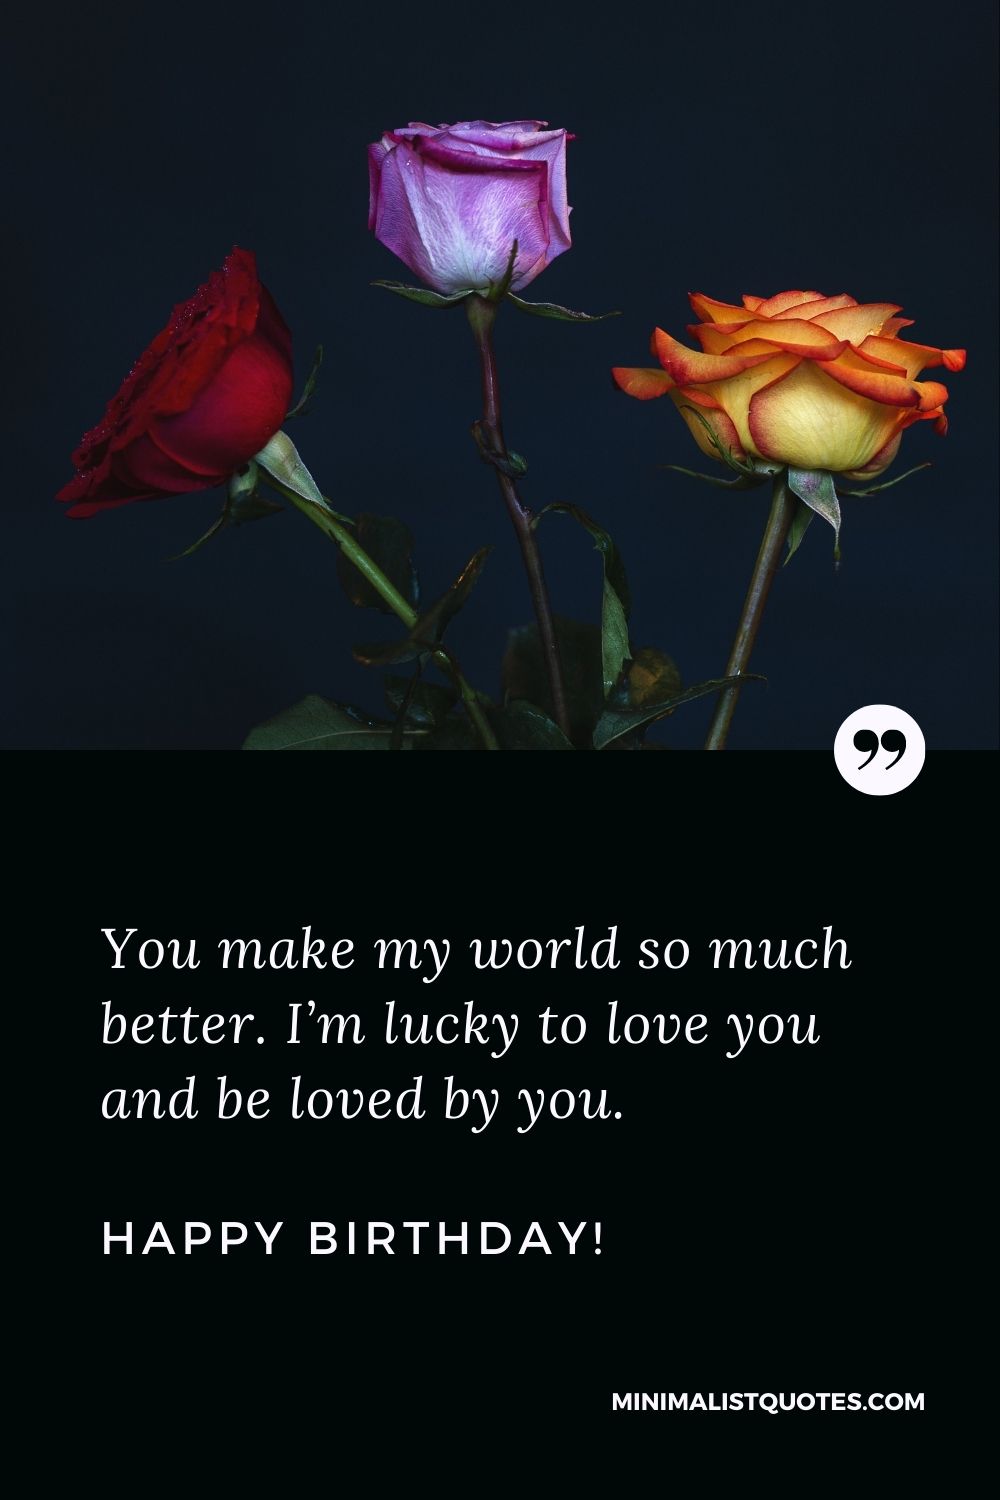 Birthday wishes for husband: You make my world so much better. I’m lucky to love you and be loved by you. Happy Birthday!